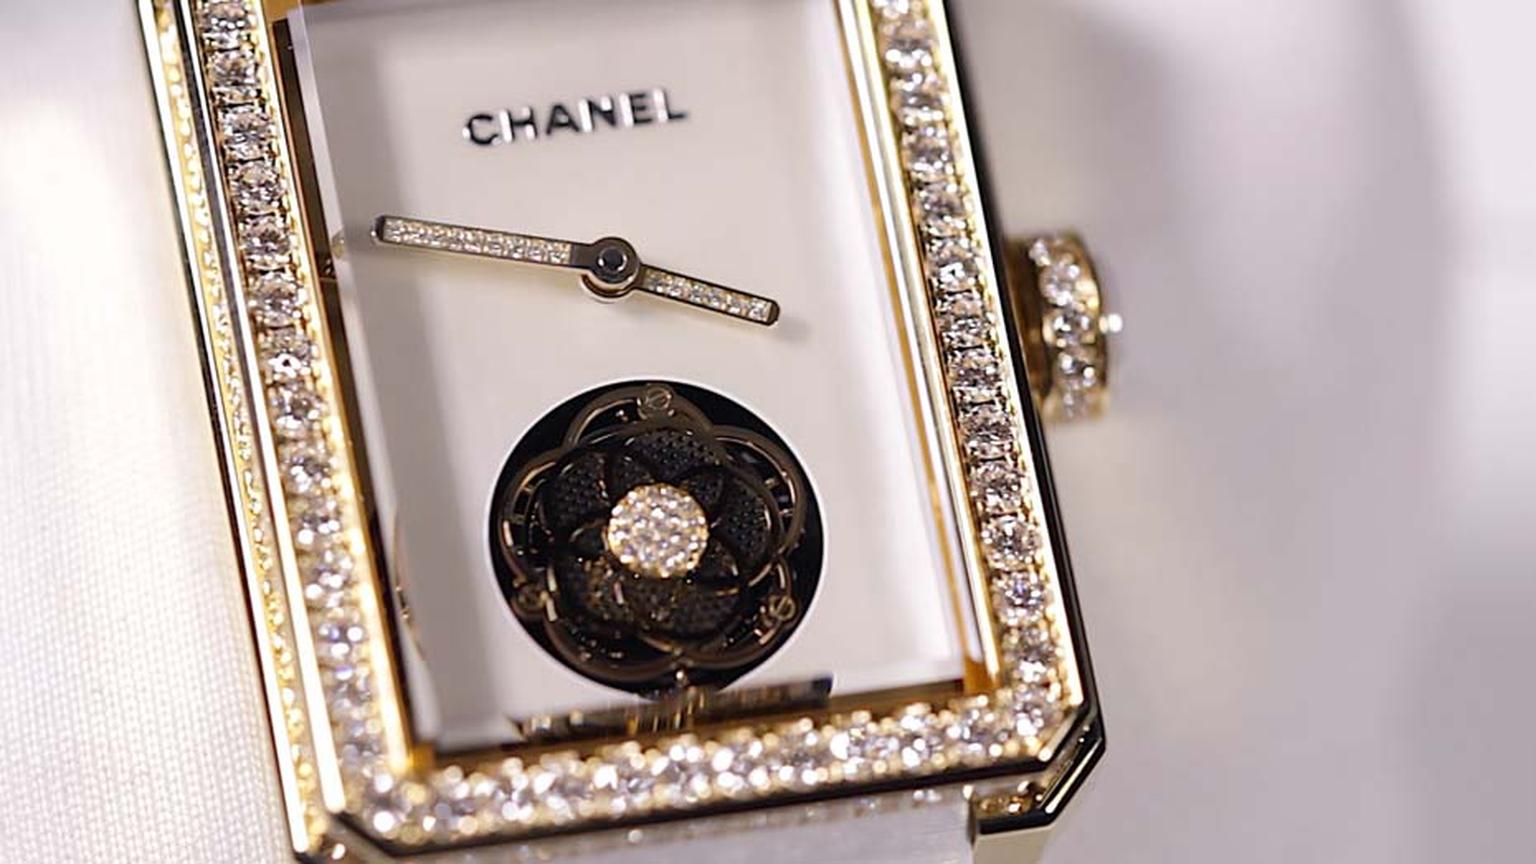 In Chanel's very own beige gold, the second Chanel Premiere Flying Tourbillon watch for 2015 is set with brilliant-cut diamonds. The flying tourbillon movement is decorated with a small camellia, Mademoiselle Chanel's favourite flower.